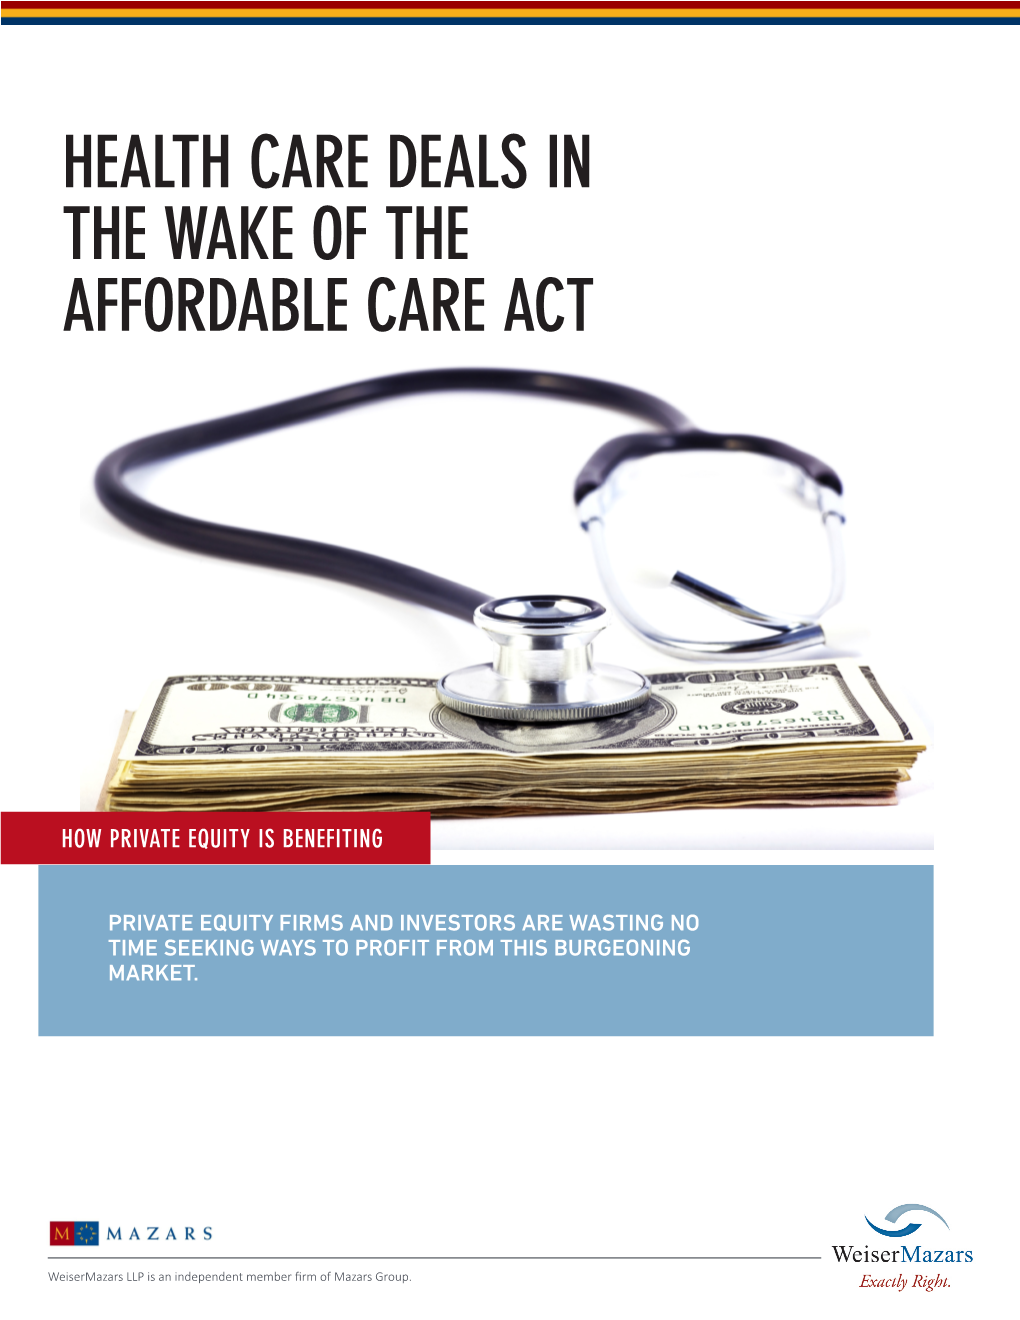 Health Care Deals in the Wake of the Affordable Care Act